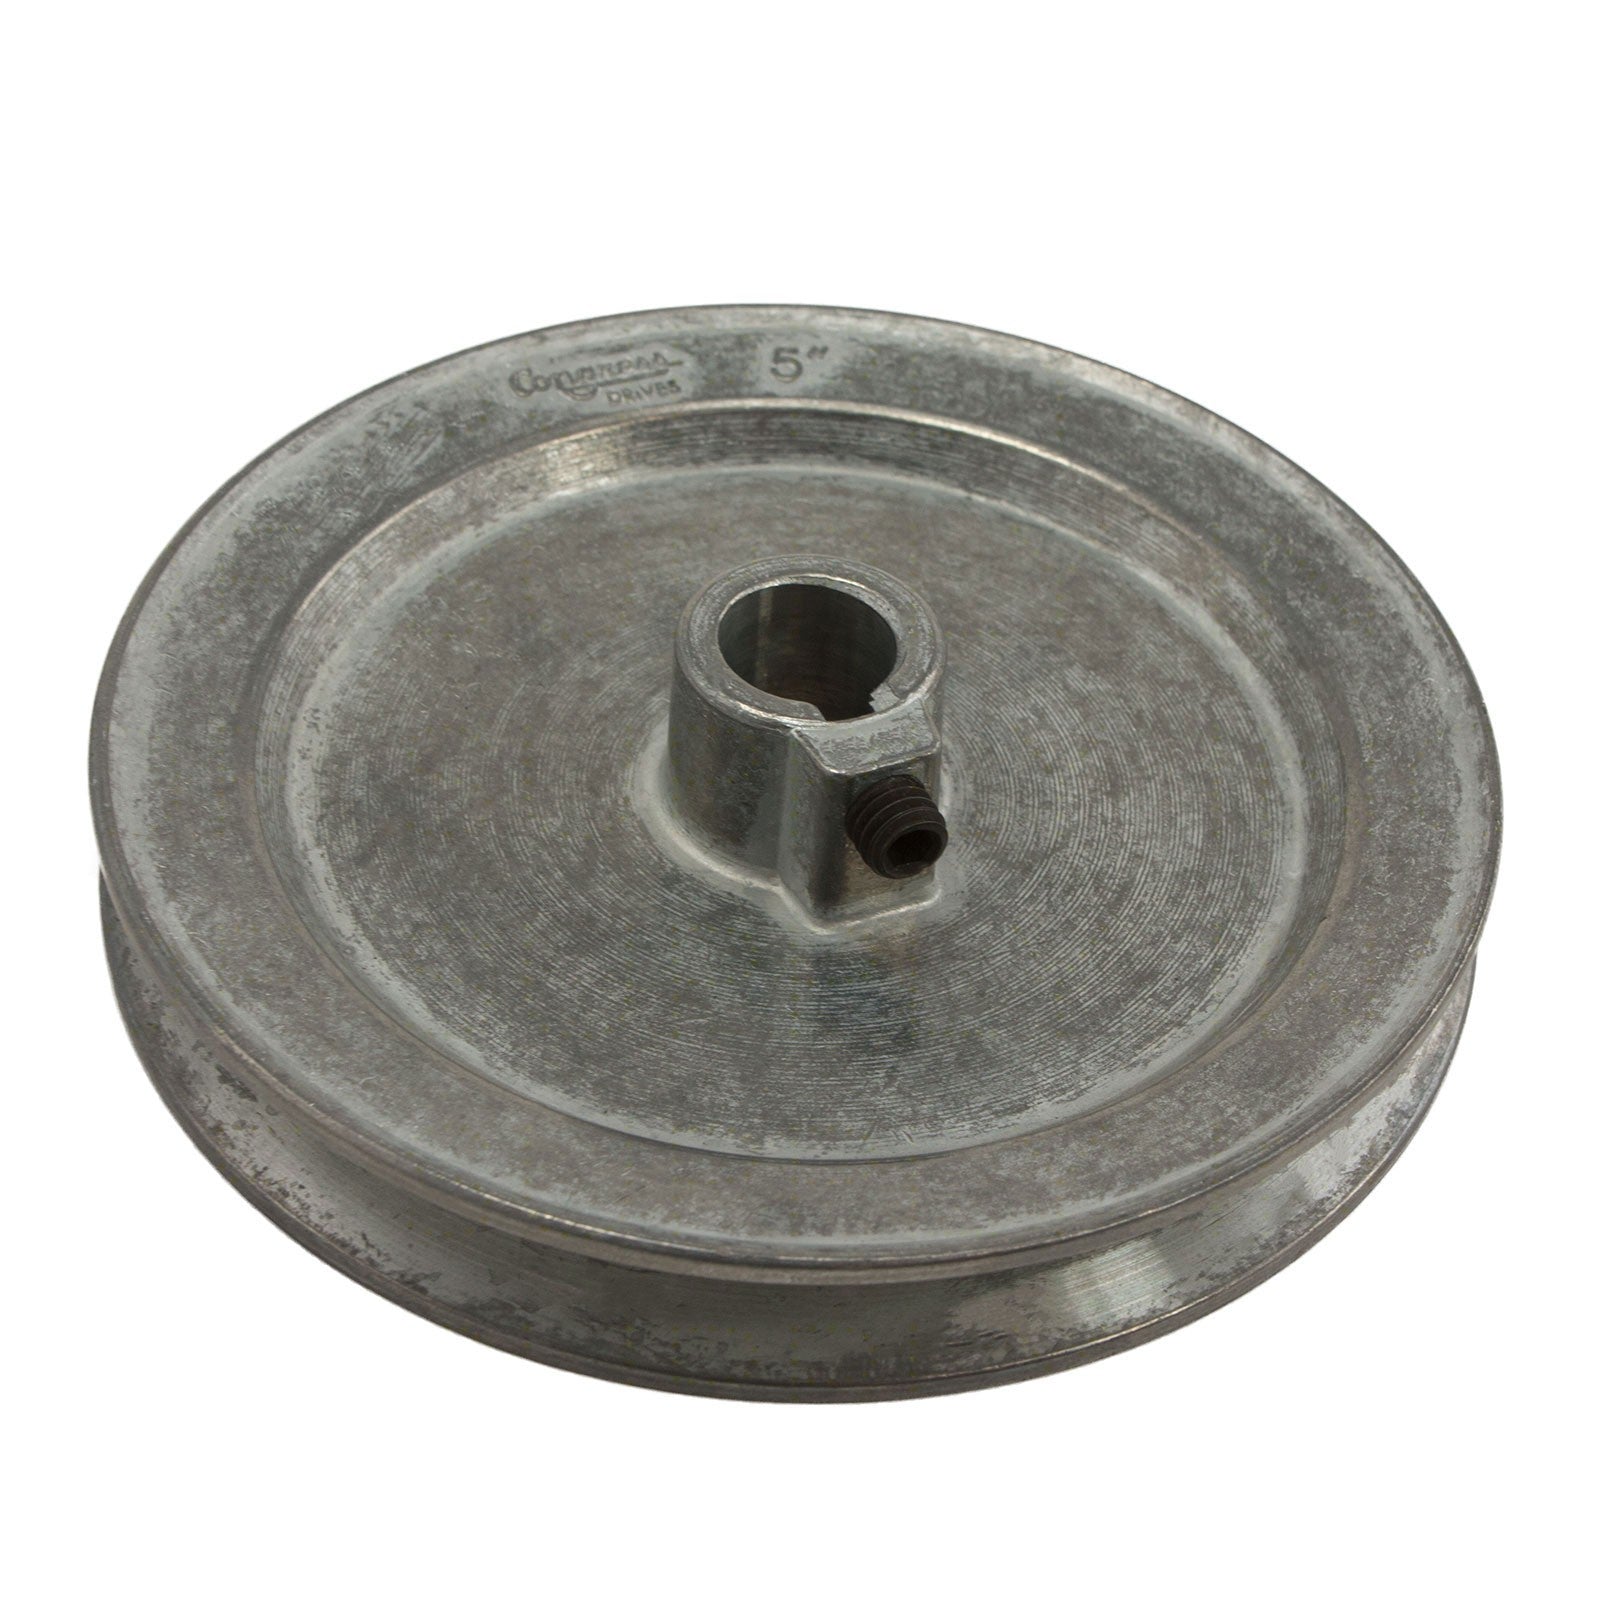 Linear 2100-388 Pulley 5", 5/8" Bore